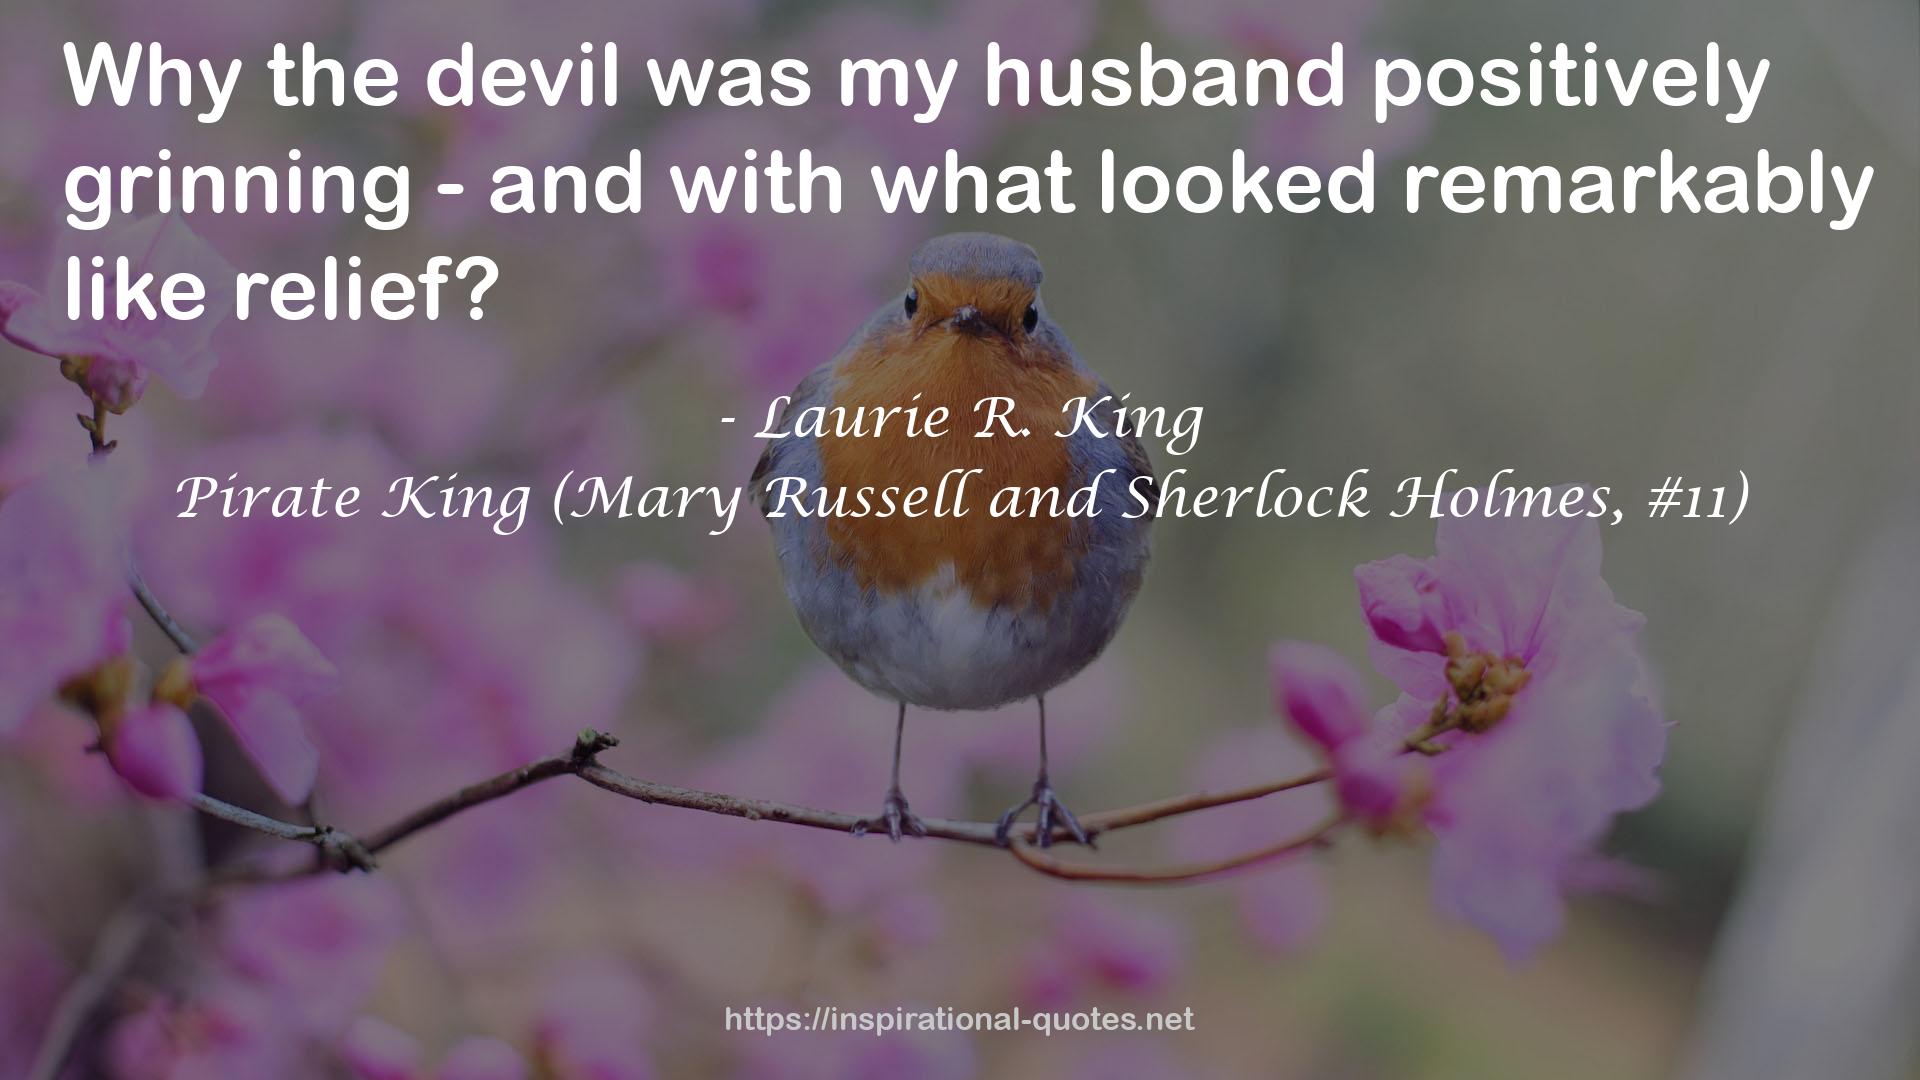 Pirate King (Mary Russell and Sherlock Holmes, #11) QUOTES